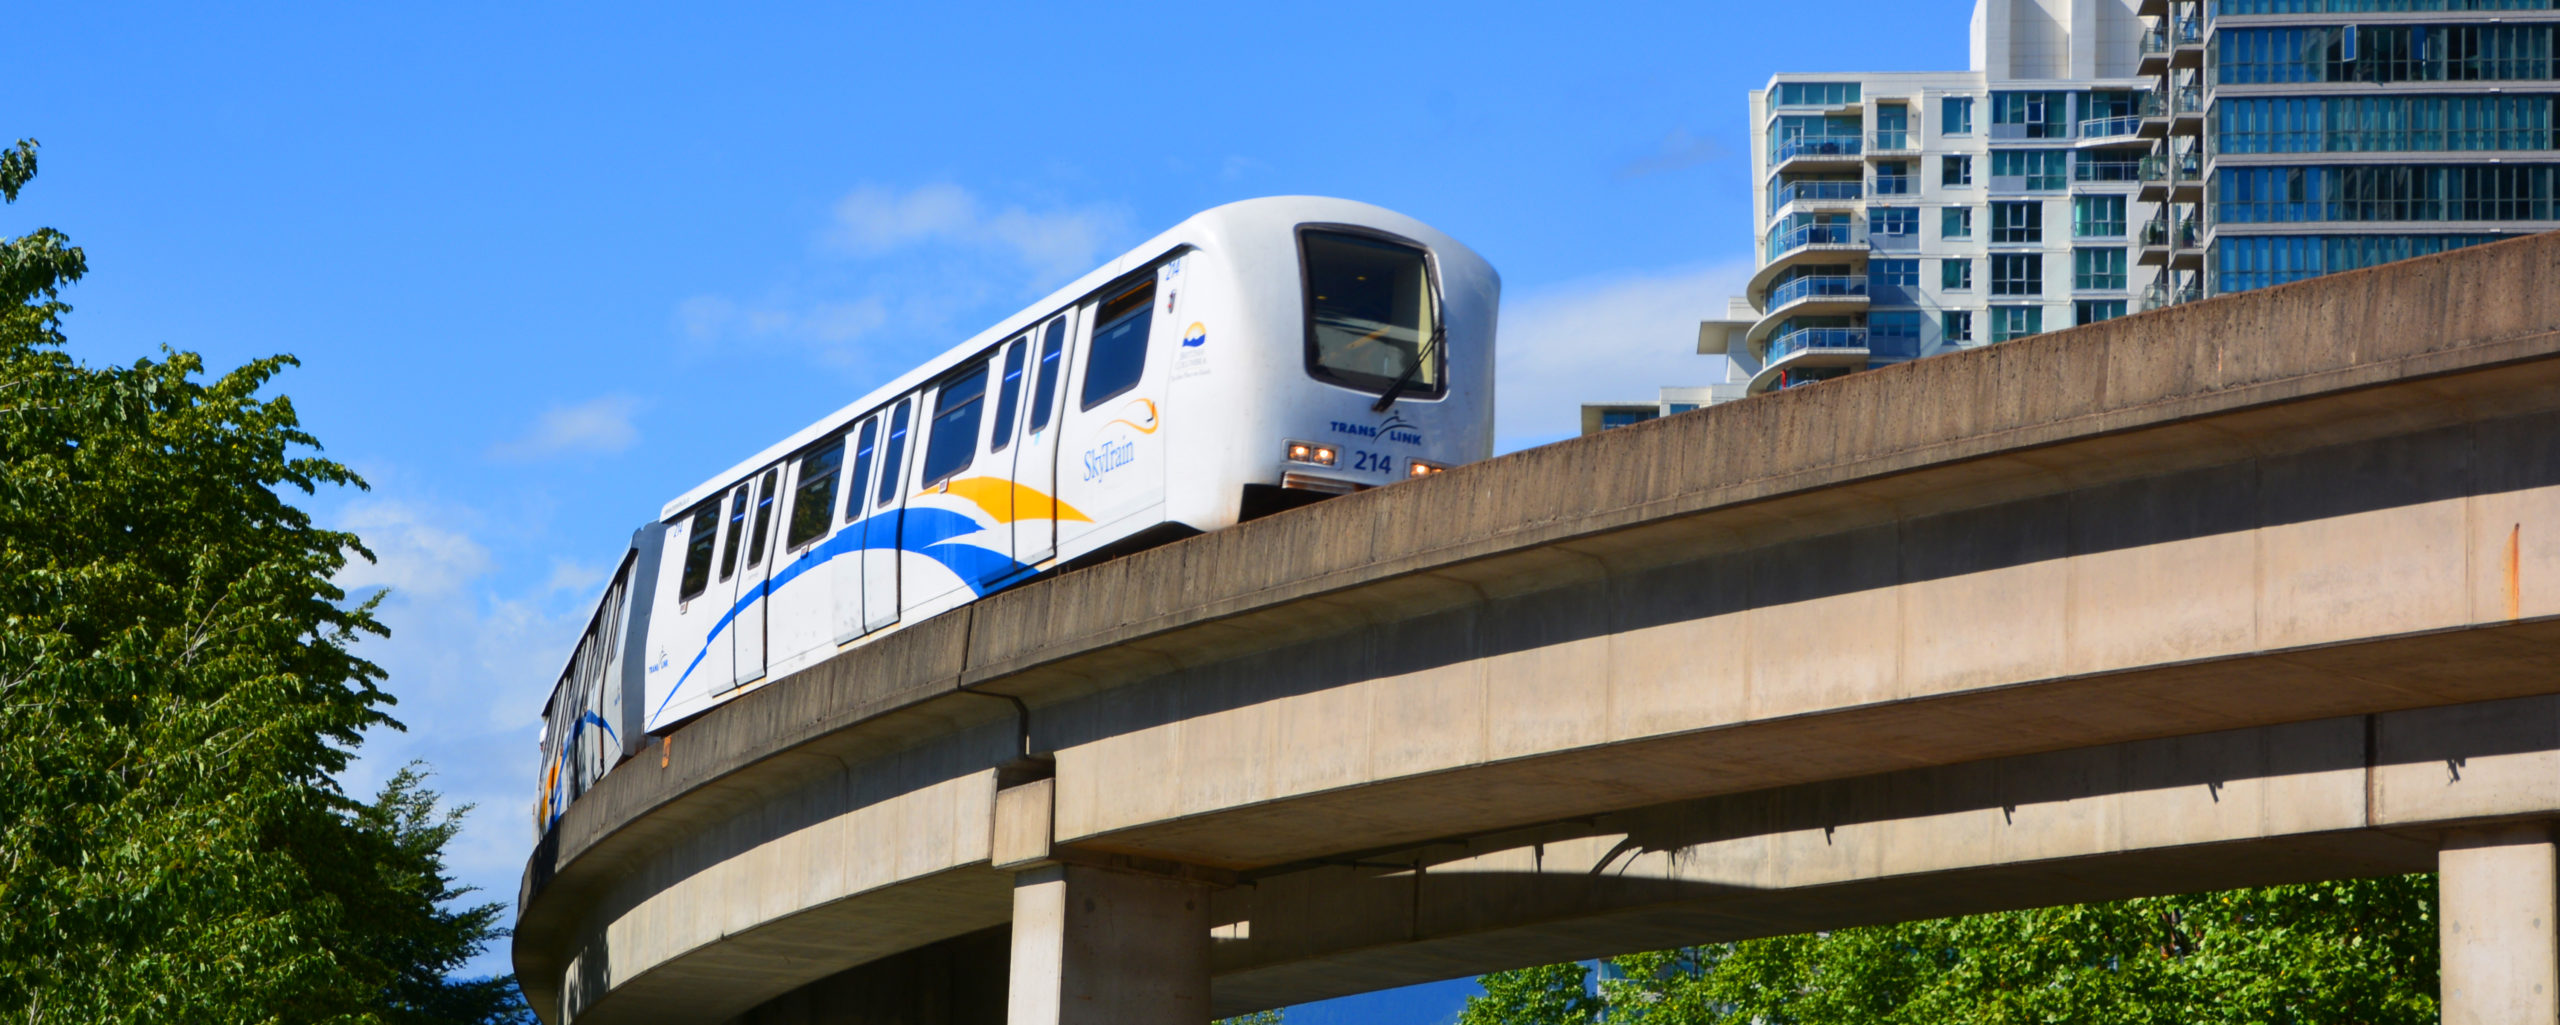 Skytrain service interrupted between Columbia and Scott Road stations